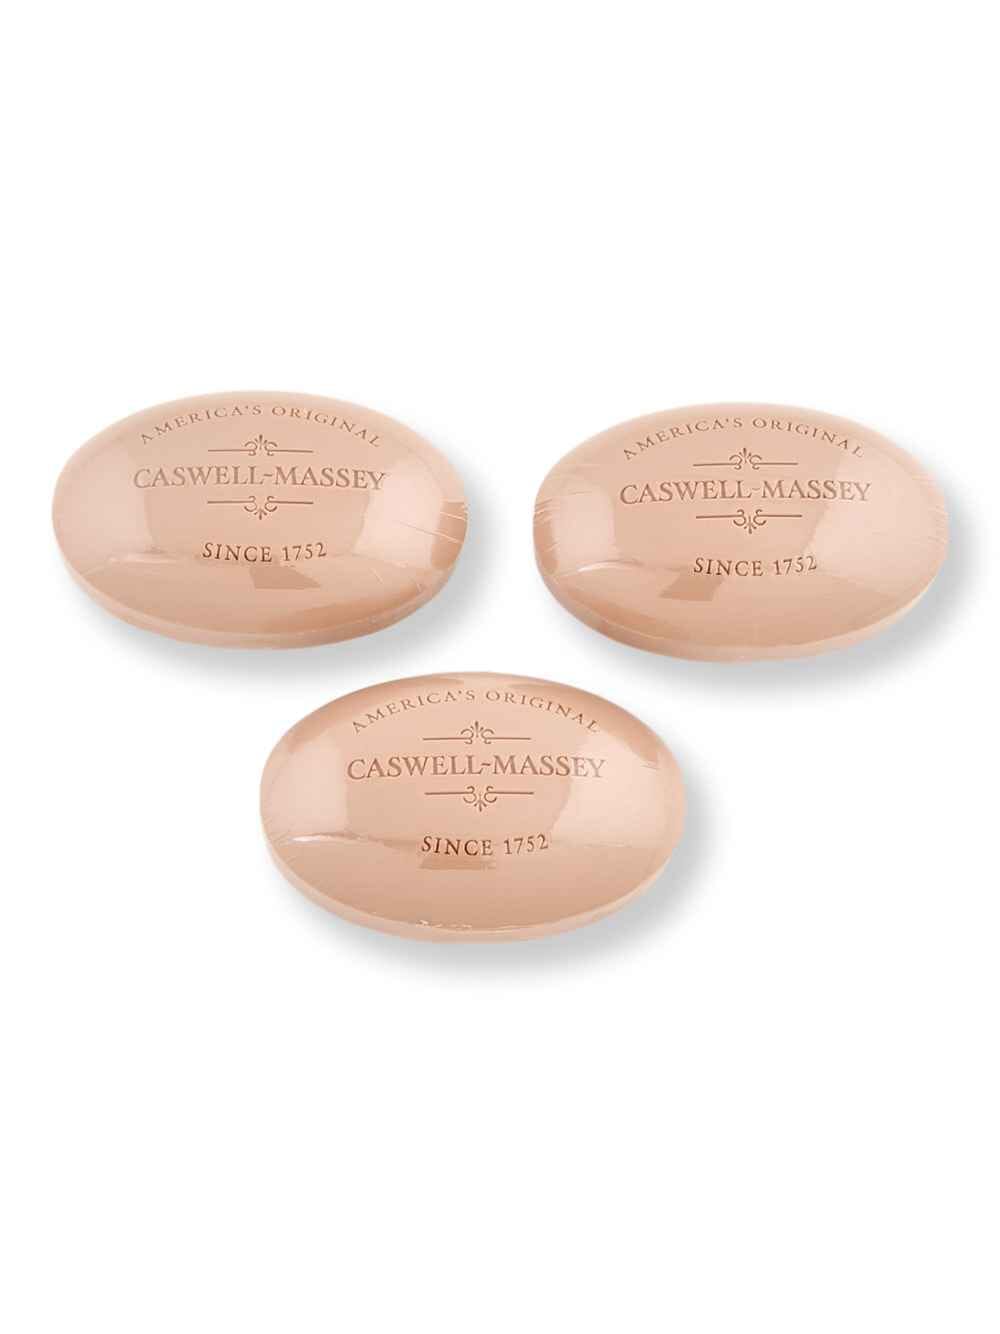 Caswell Massey Caswell Massey Heritage Tricorn Soap Set 5.8 oz 3 Ct Bar Soaps 